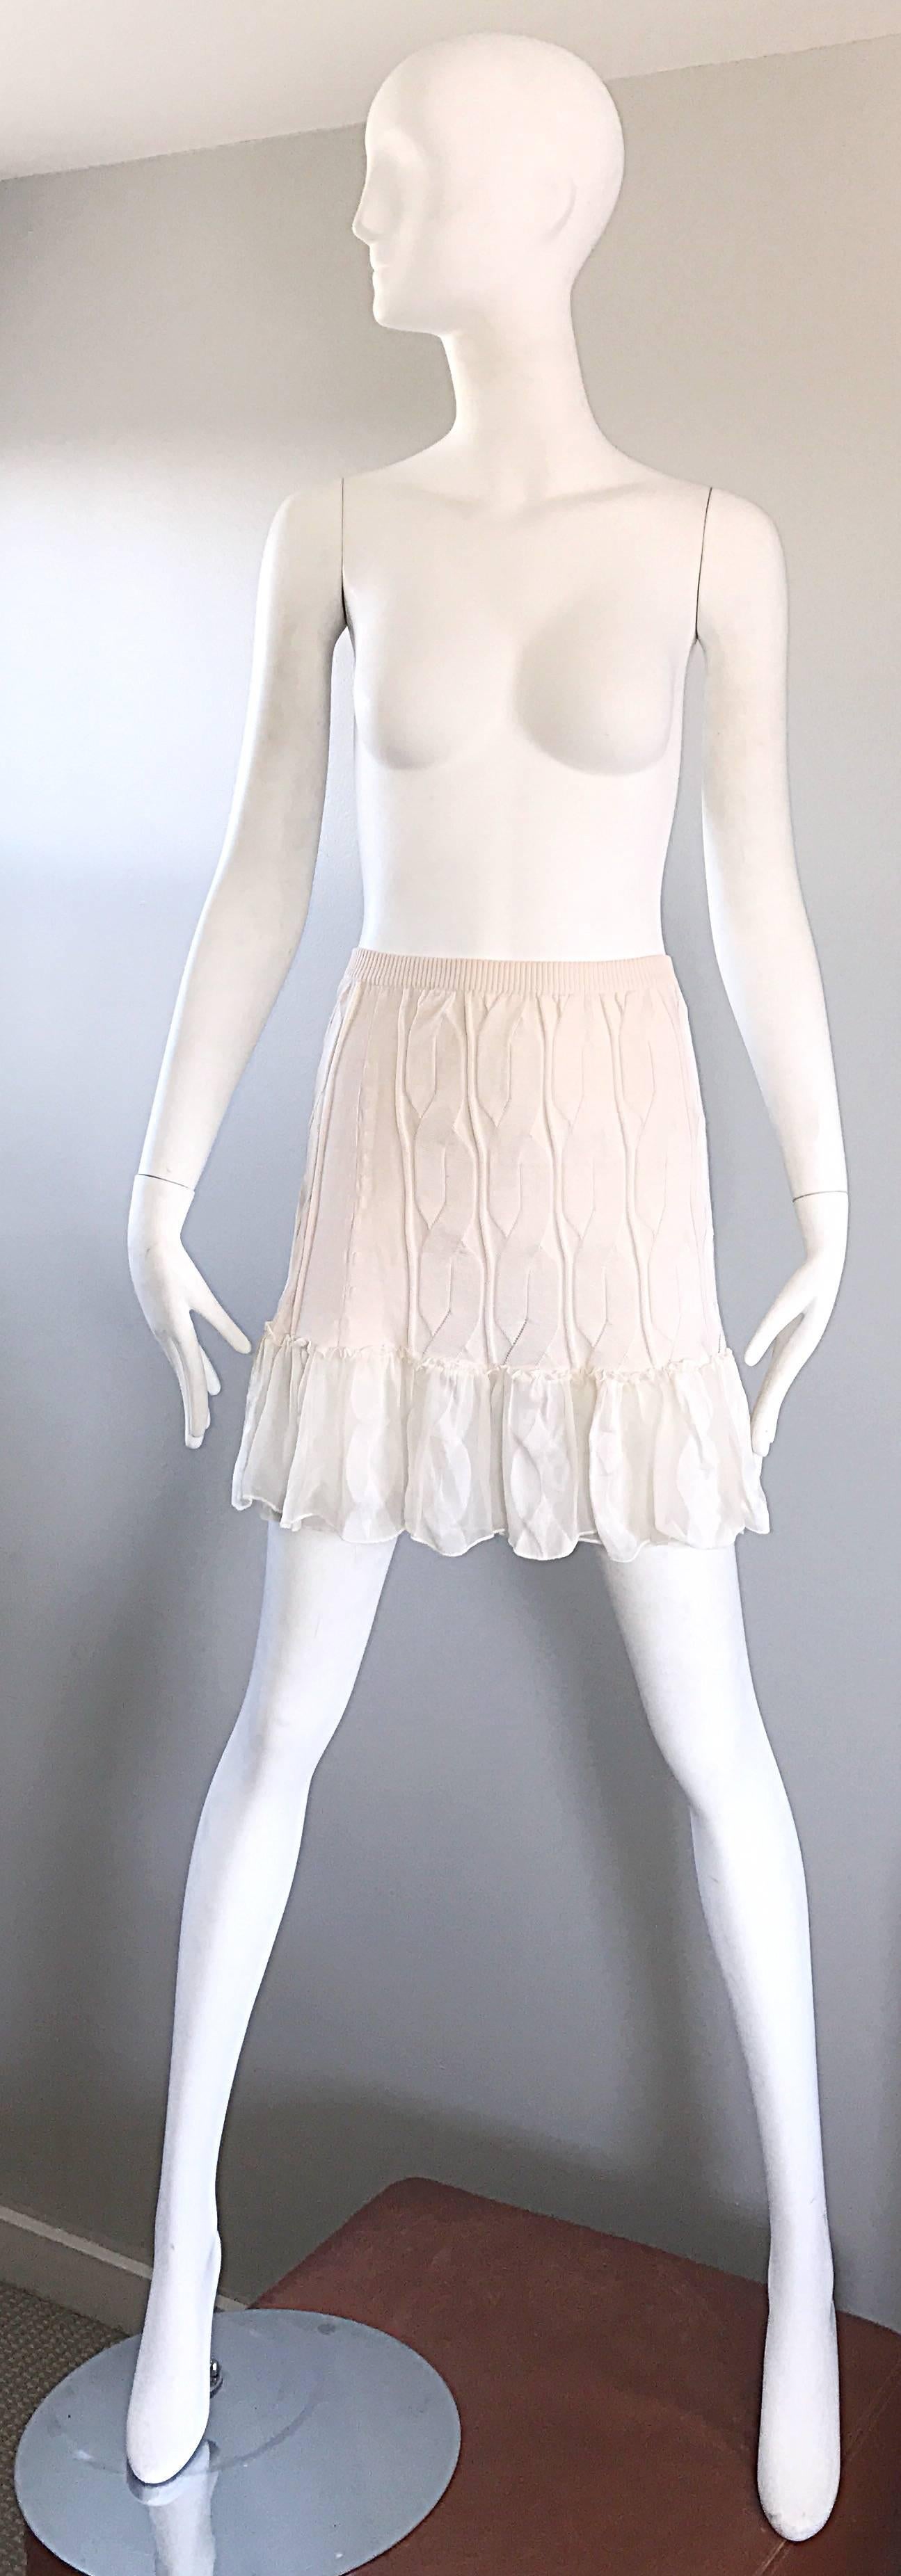 Chic vintage 1990s unworn CALVIN KLEIN COLLECTION silk mini skirt OR strapless top! This is one of those pieces that TRULY can be worn as wither a skirt or blouse, and looks like it is supposed to actually be one of those! Classic off-white ivory